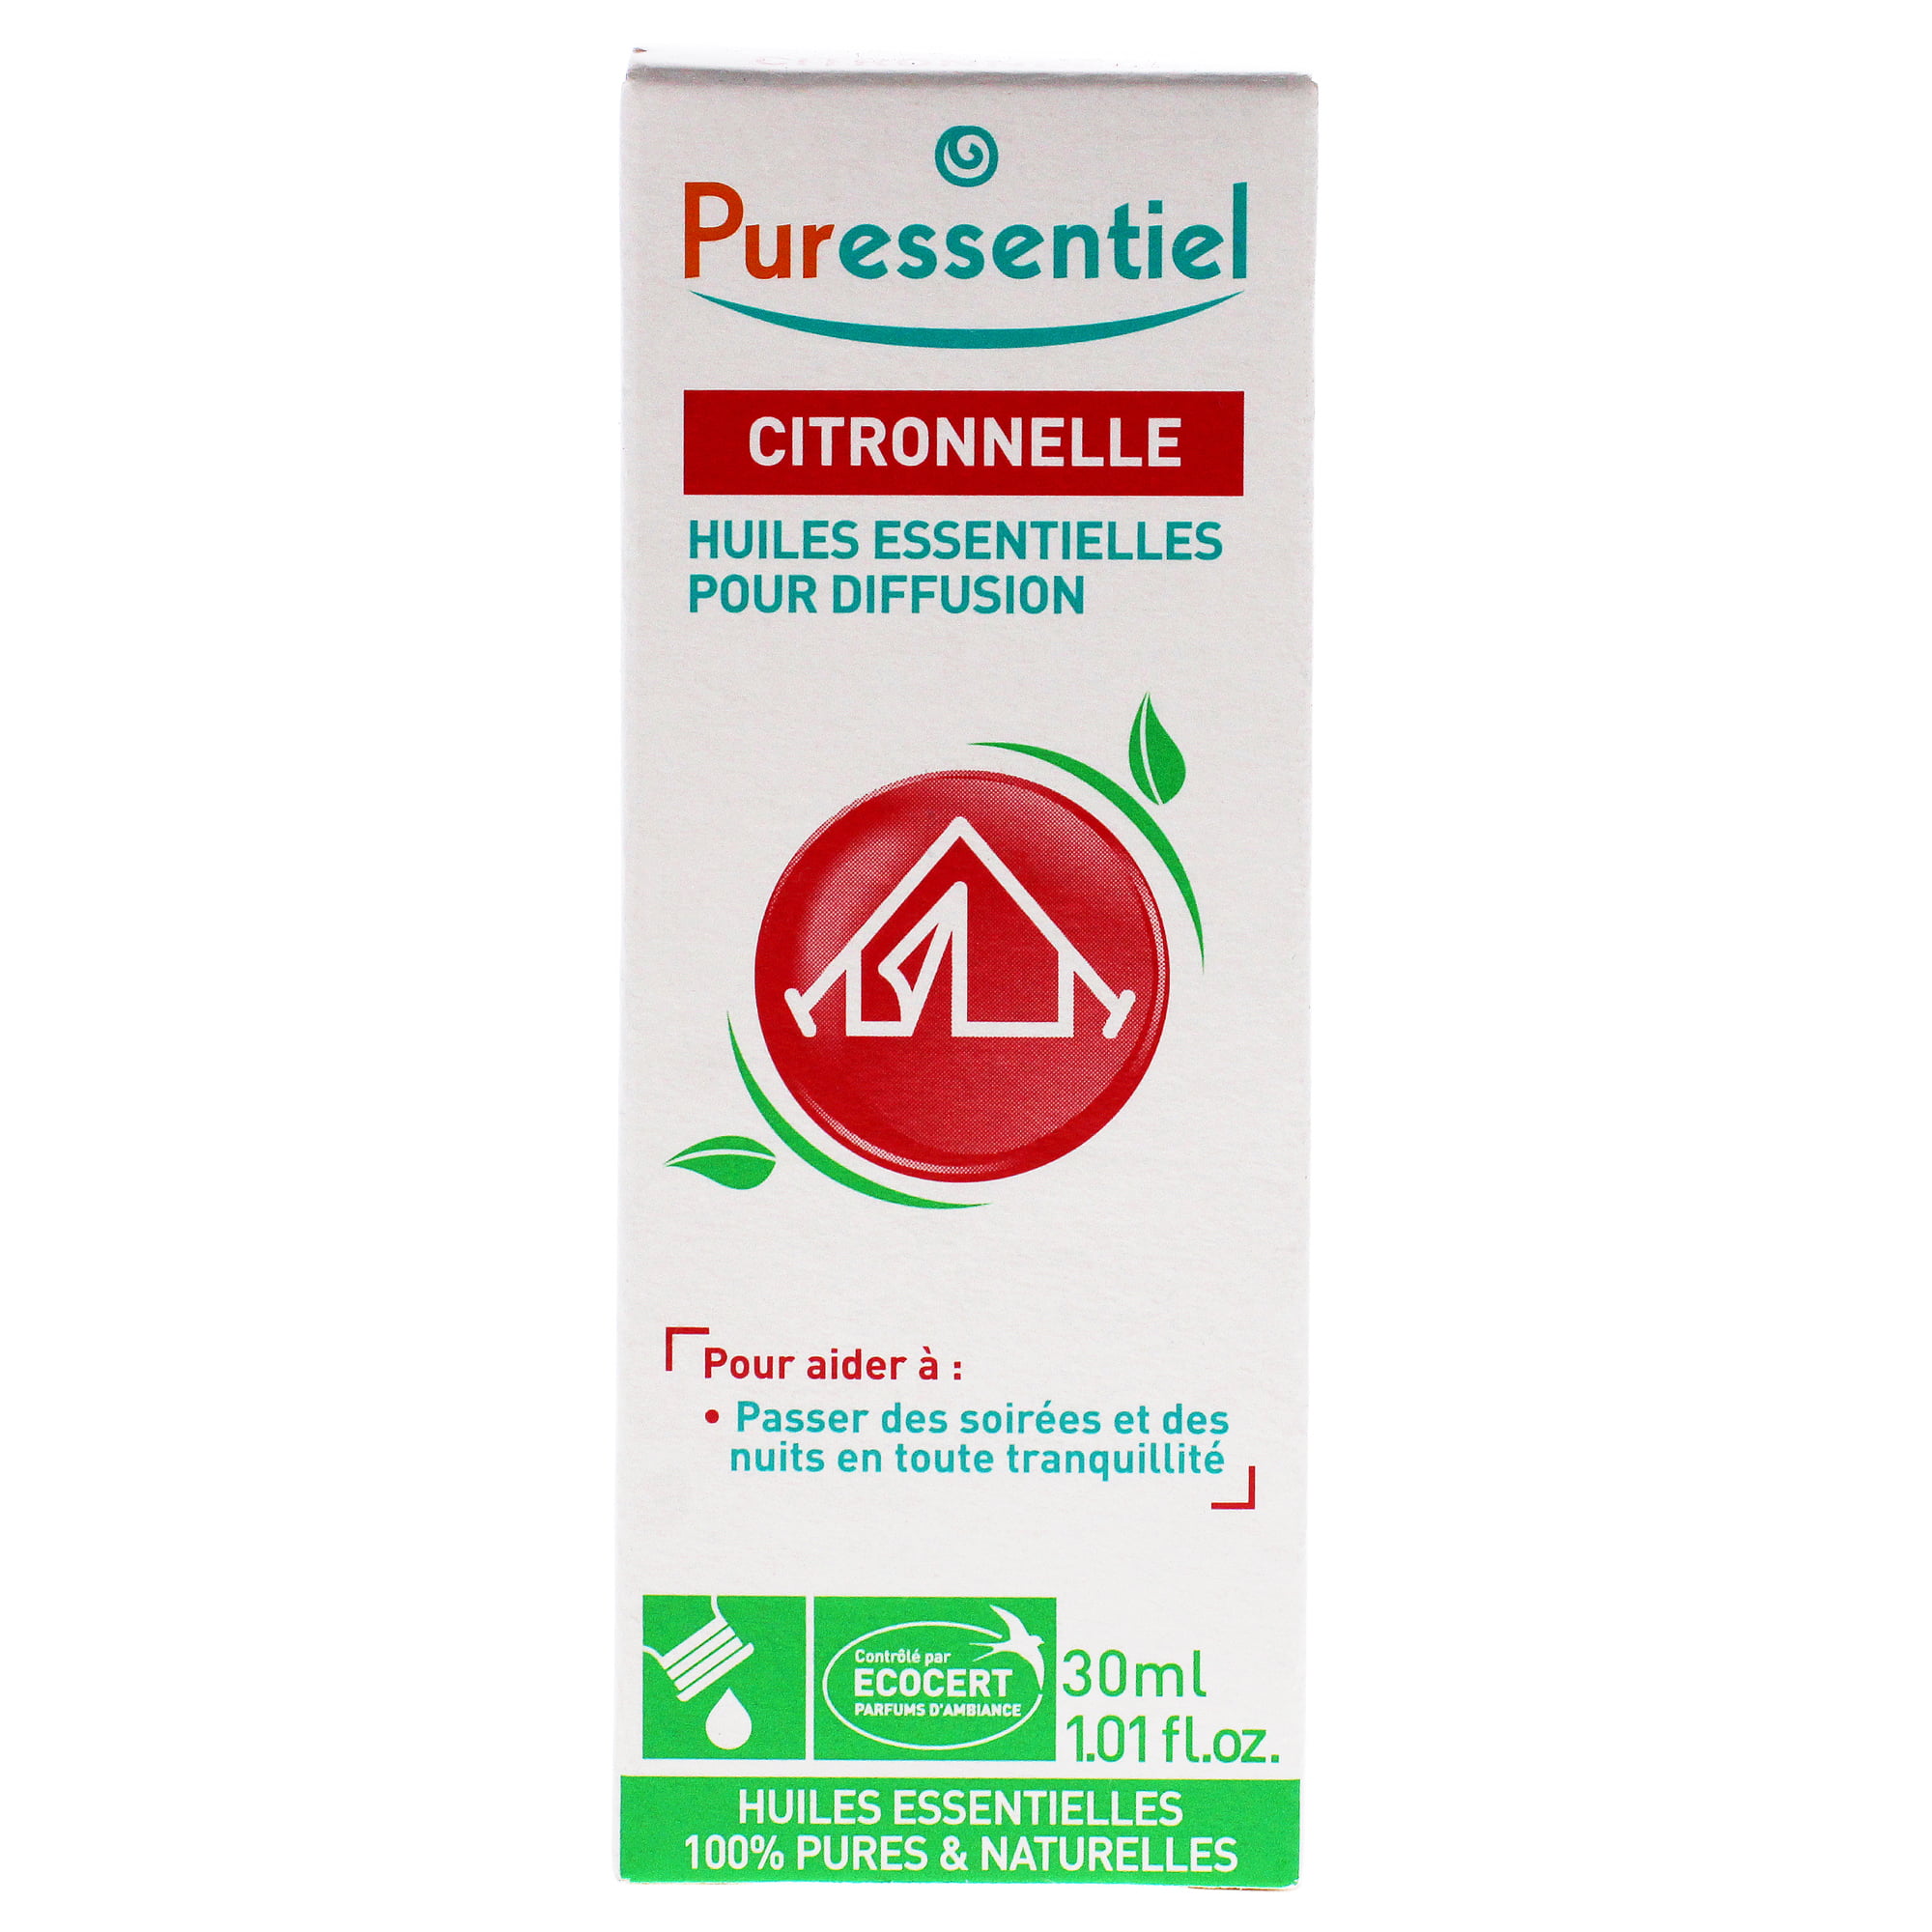 Puressentiel Diffusion Essential Oil - Air Purifying Blend, 1.01 oz 